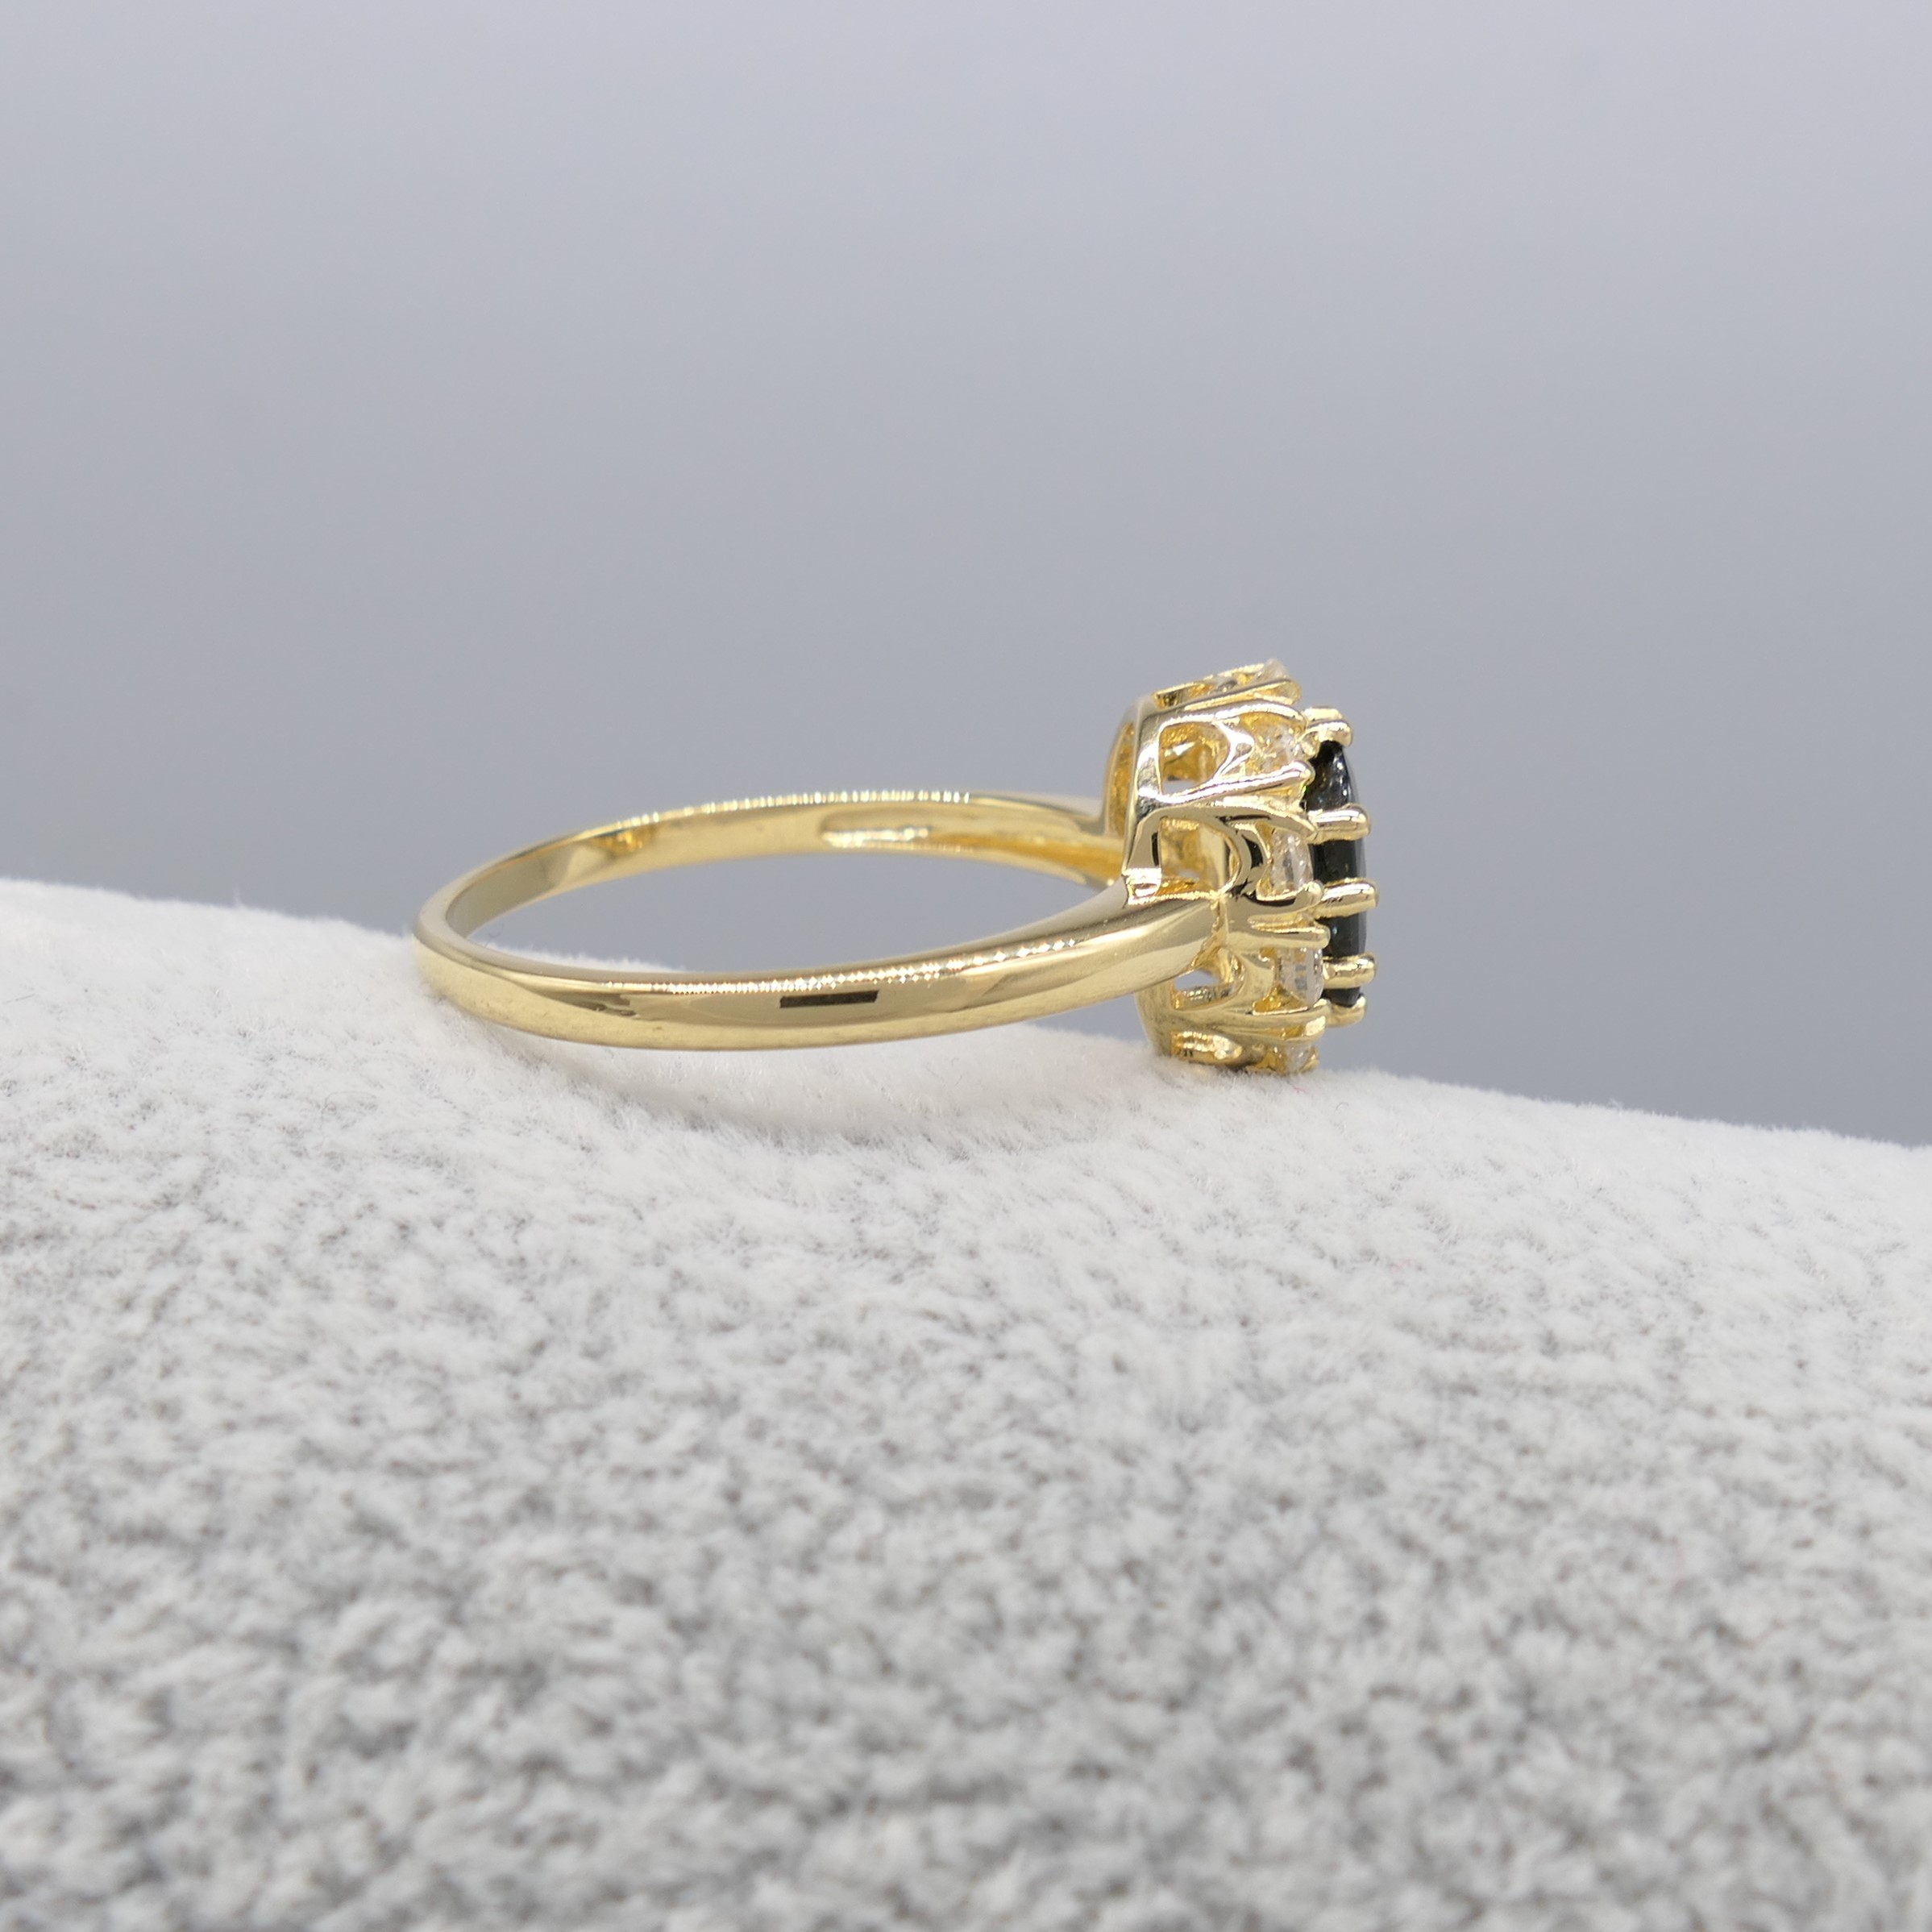 Oval-cut Sapphire and Round Brilliant-cut Diamond Cluster Ring In 18ct Yellow Gold - Image 6 of 6